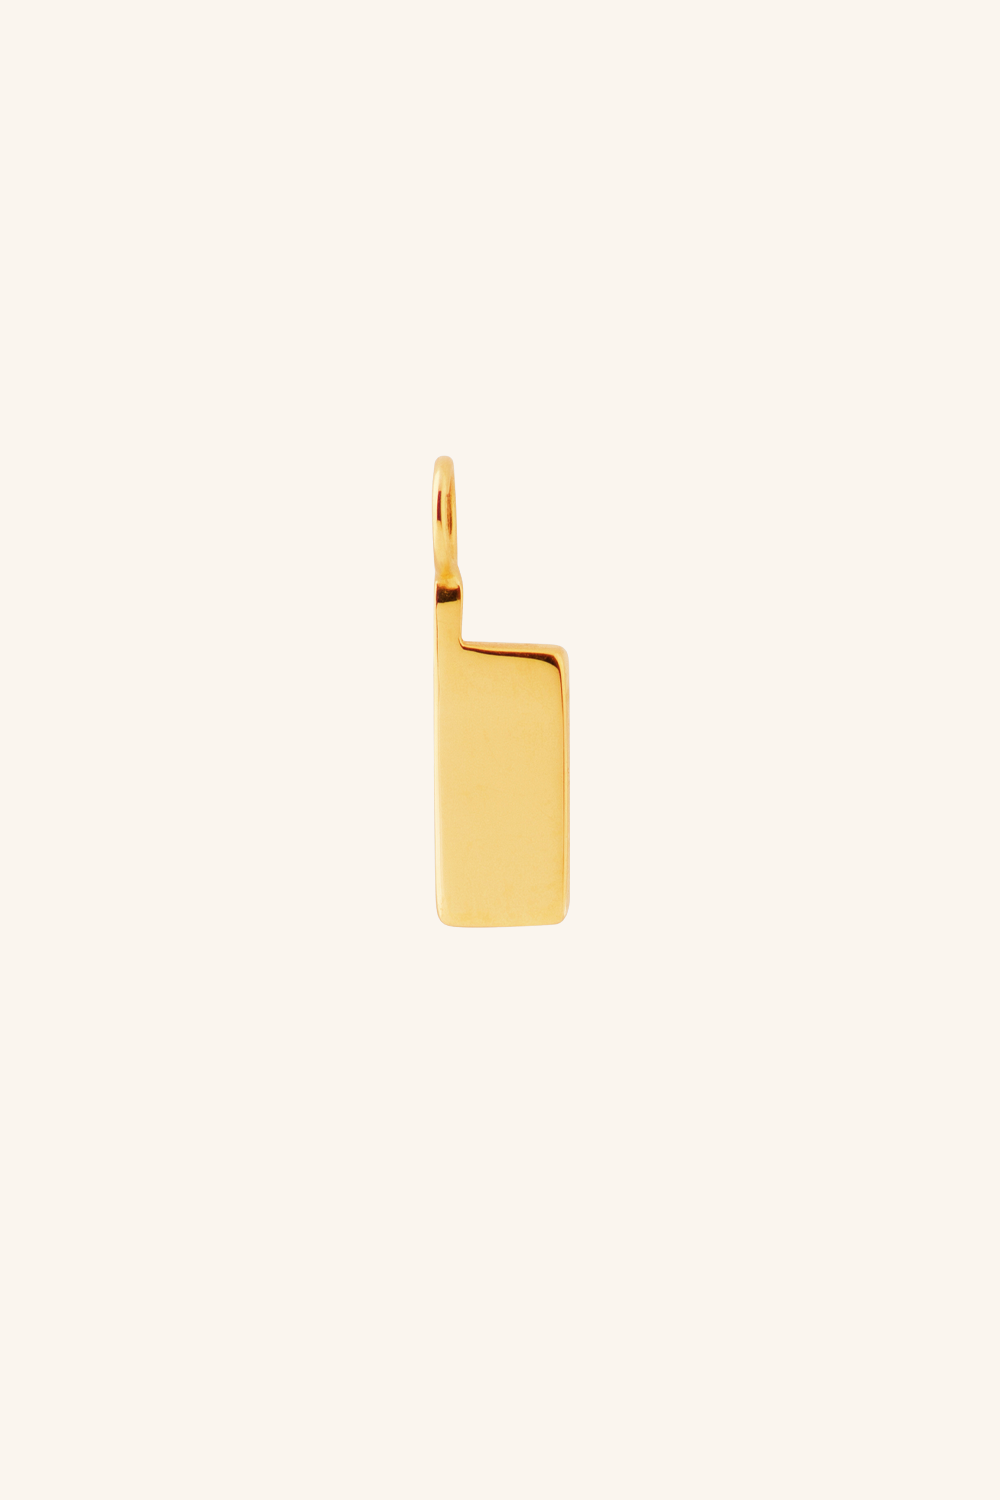 The Fine Gold Vintage Phone Charm 